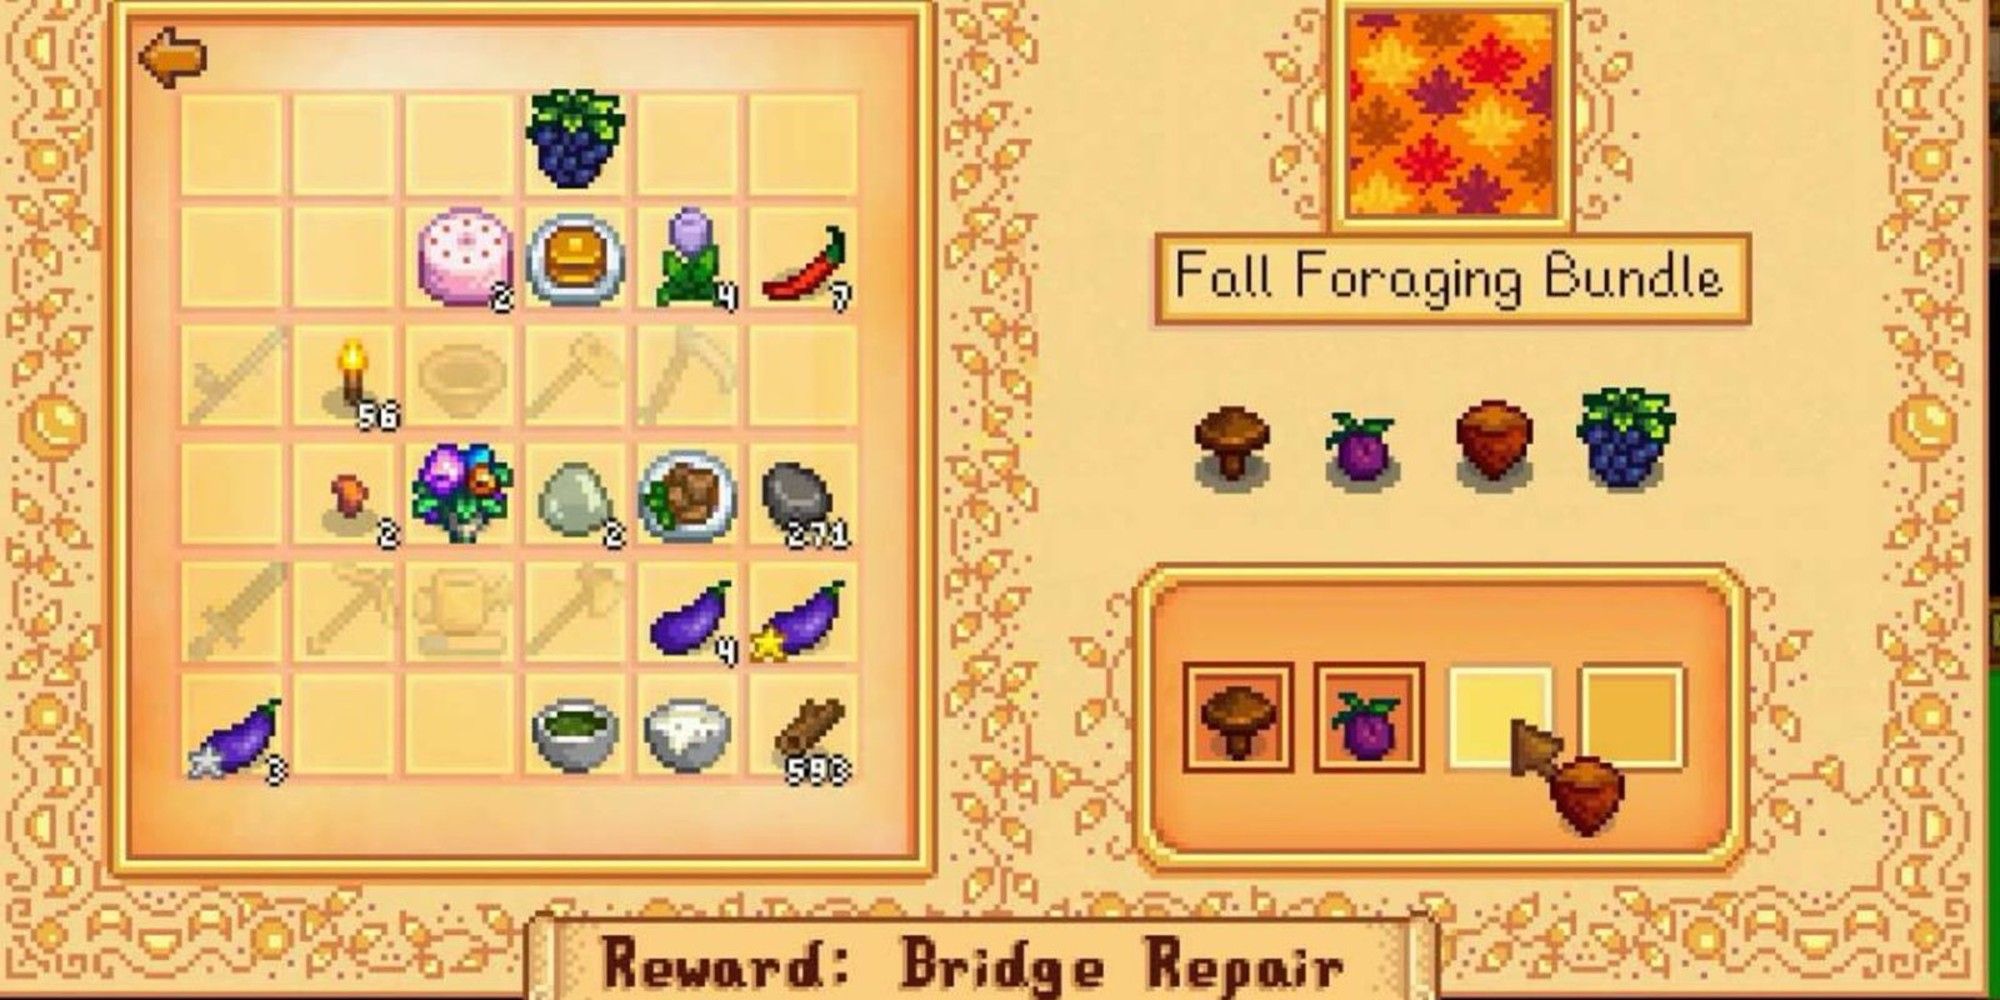 fall foraging bundle selected from community center